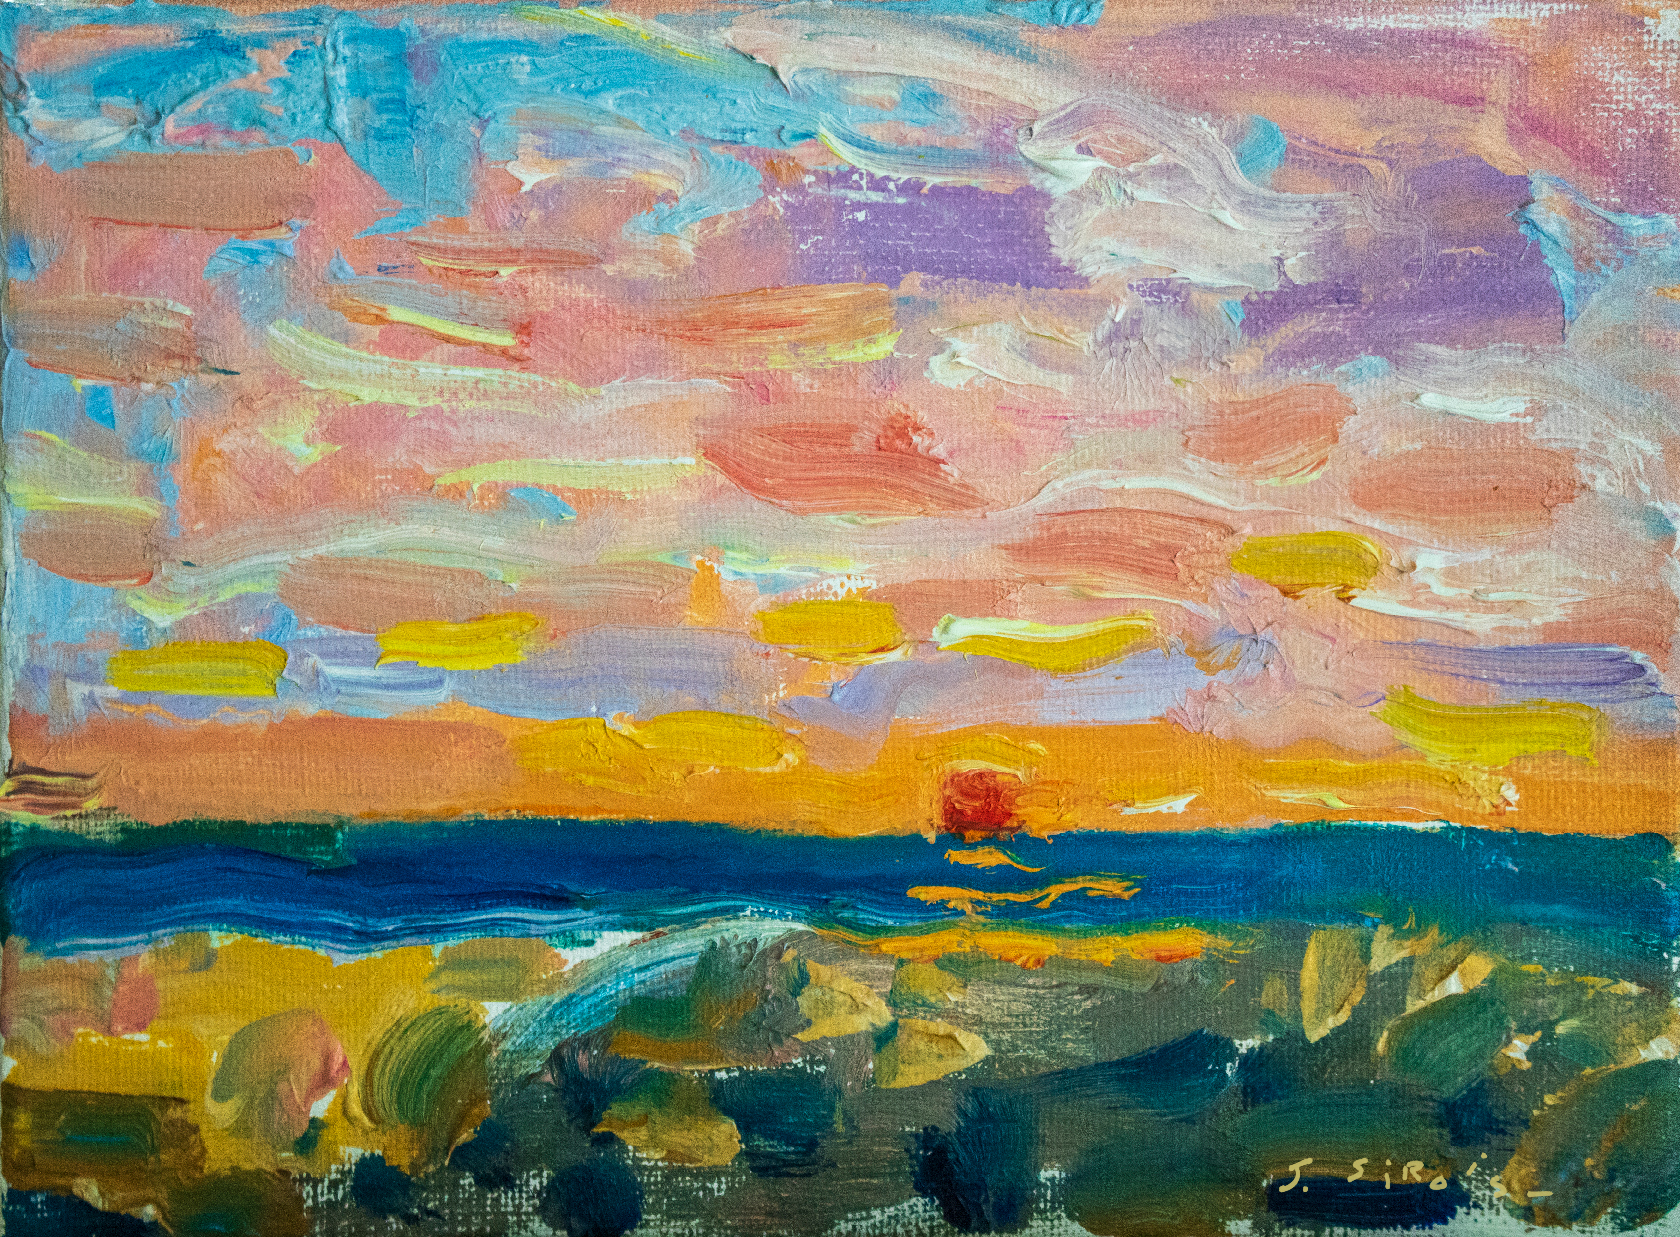 Img 0772 sunset reflections 8x6 oil sm 72ppi mlwev1